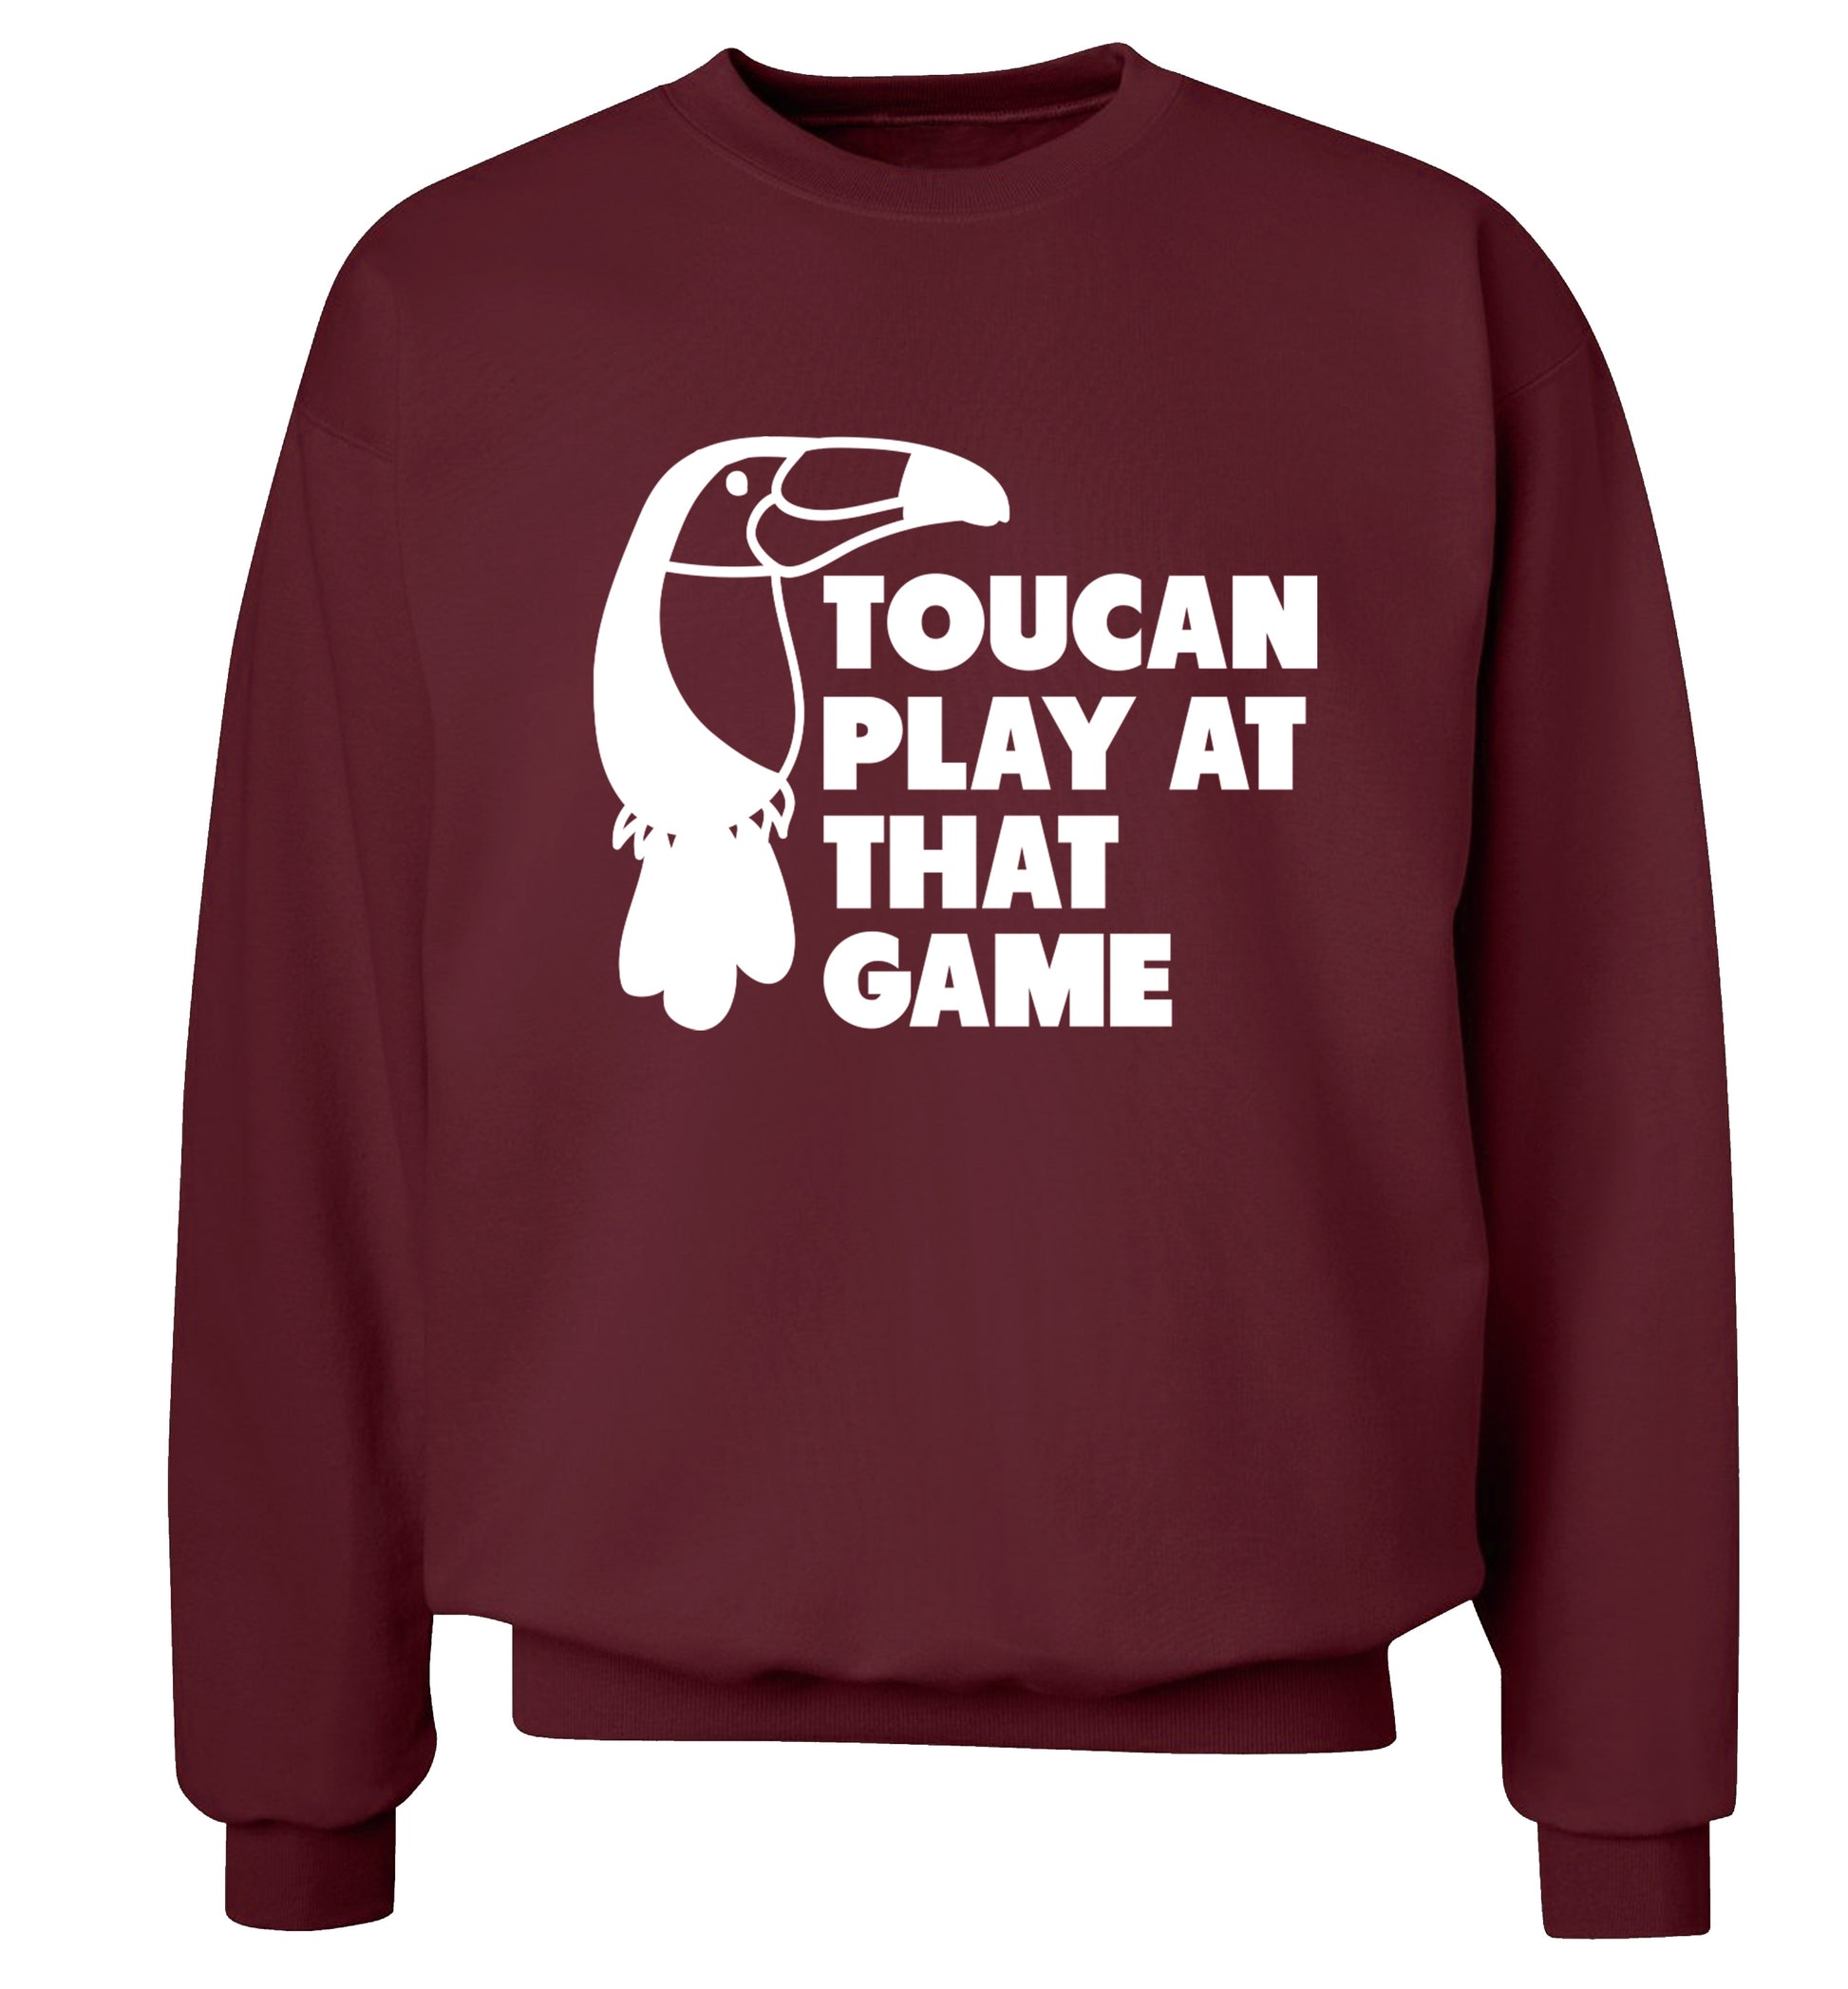 Toucan play at that game Adult's unisex maroon Sweater 2XL